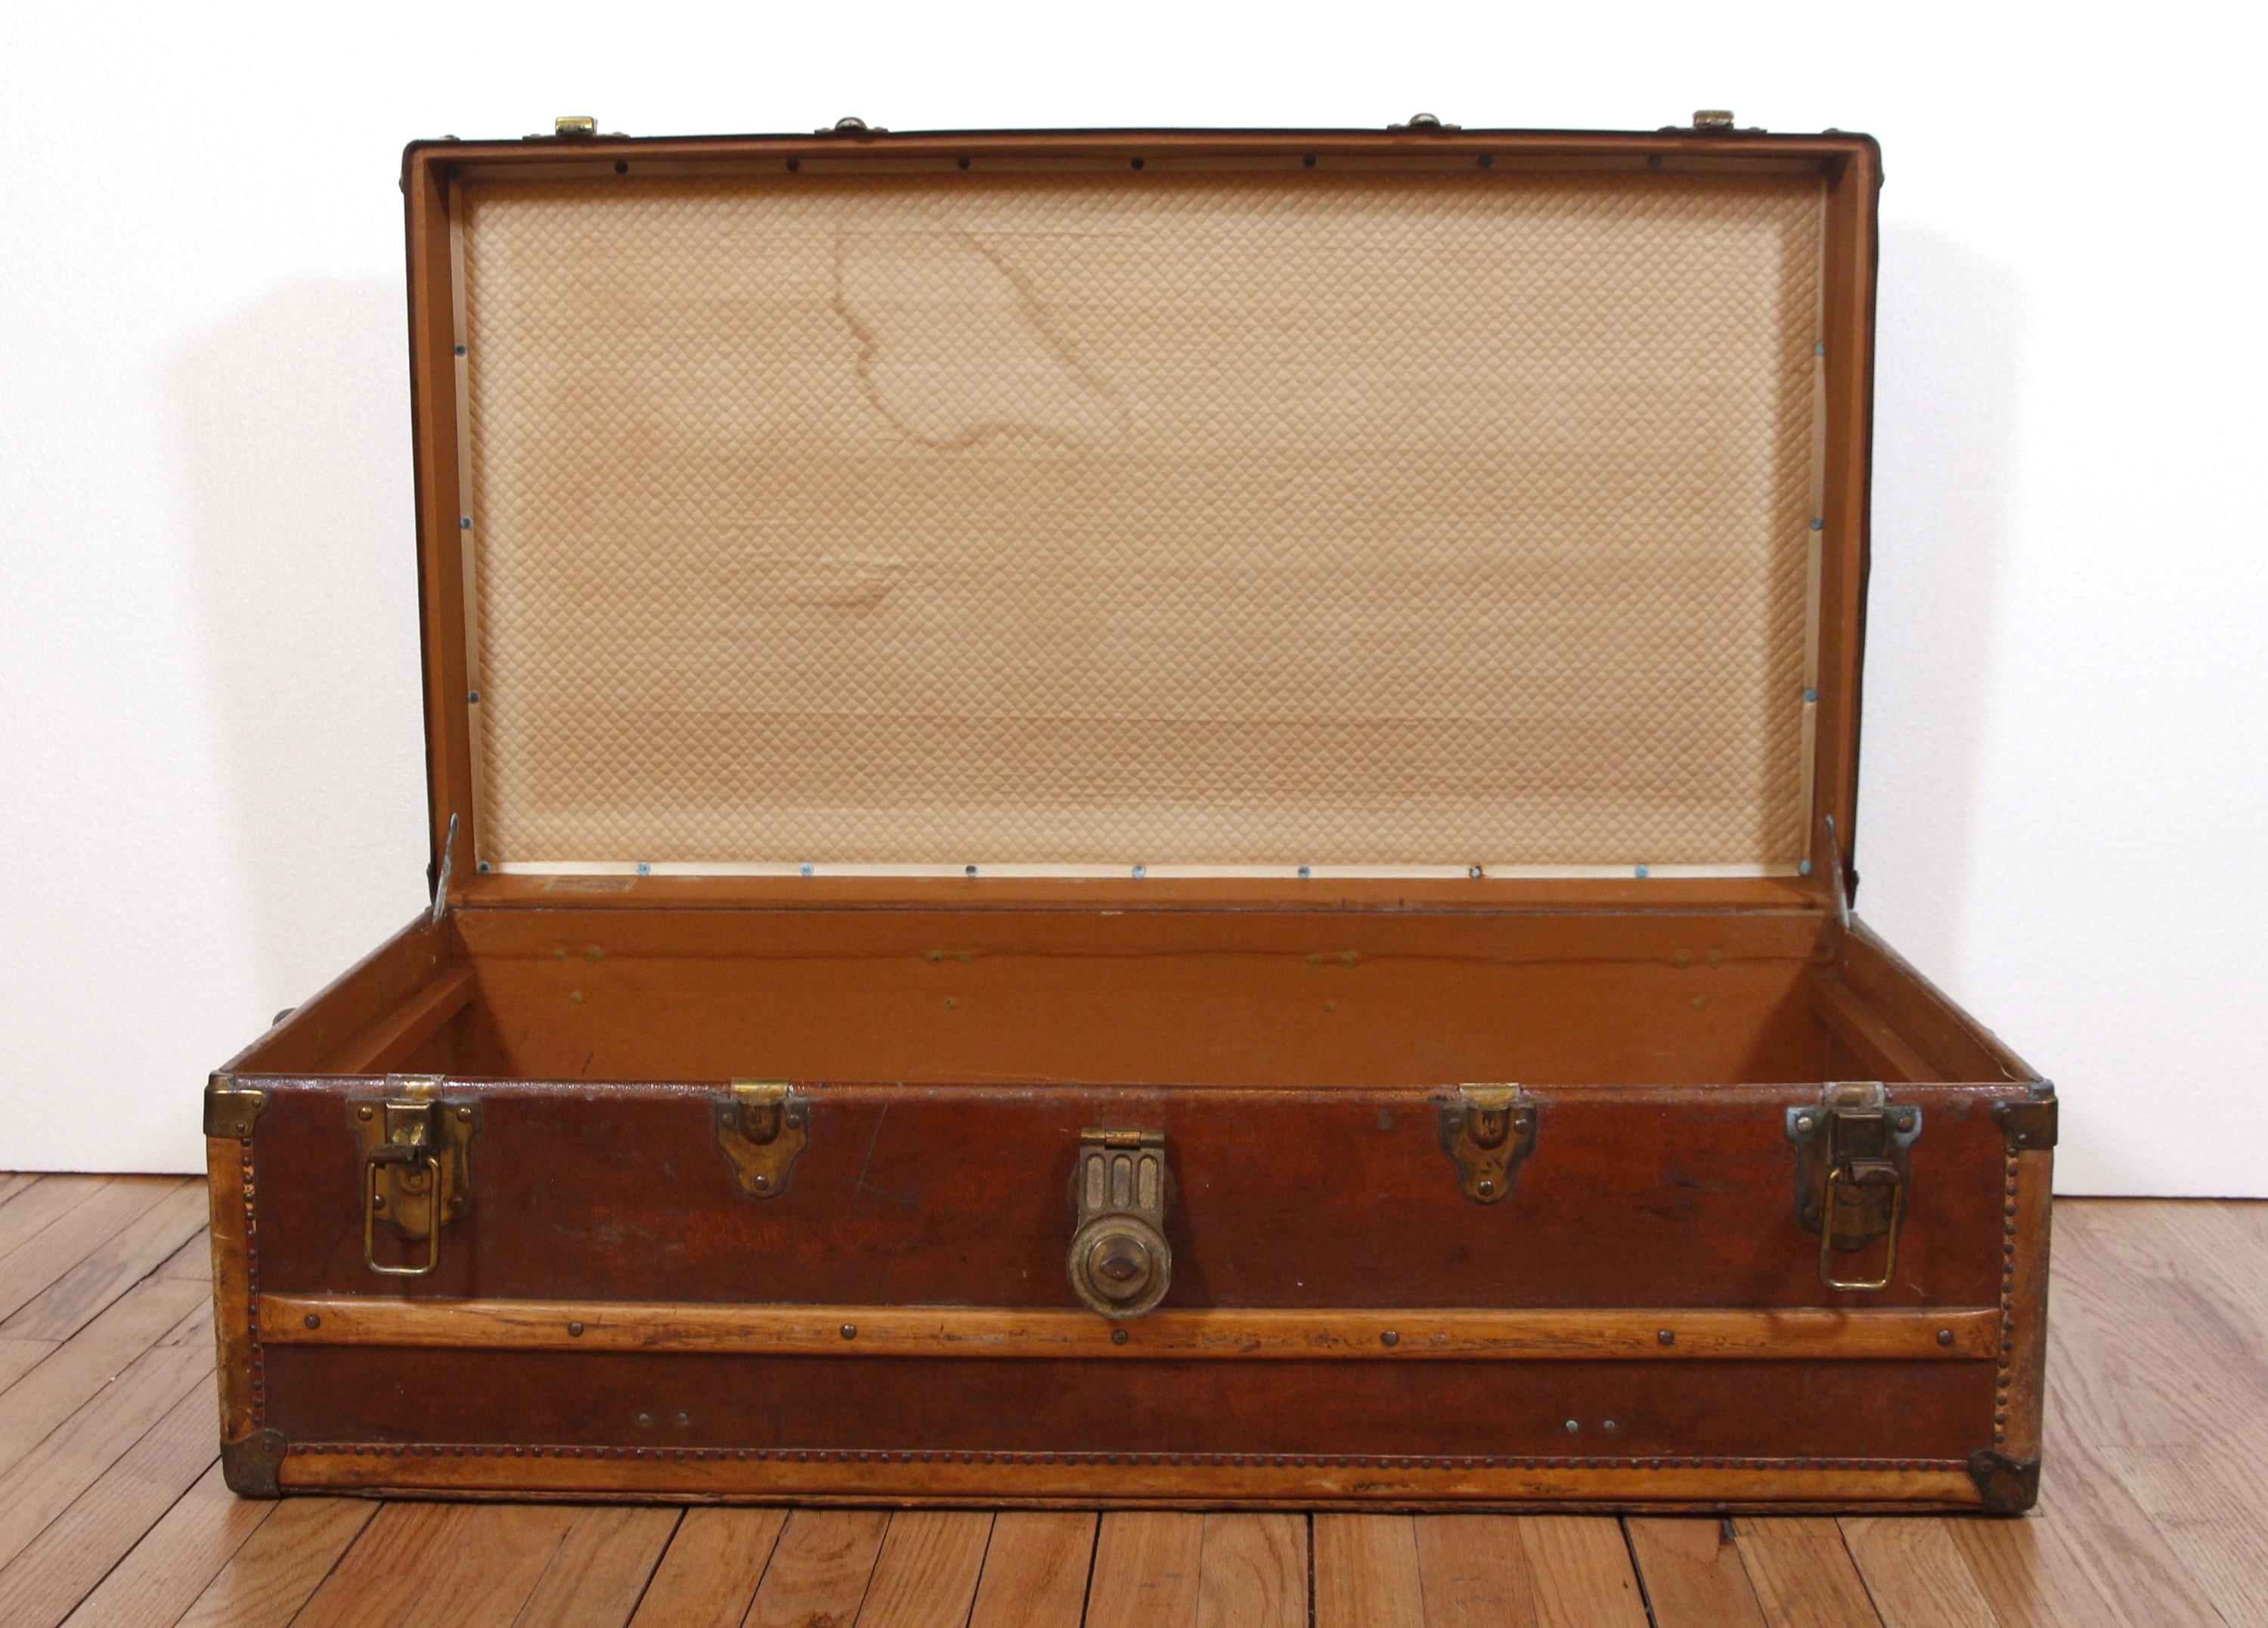 20th Century 1900s Wood Trunk Luggage, Arthur Gilmore Inc. W/ Leather Handles